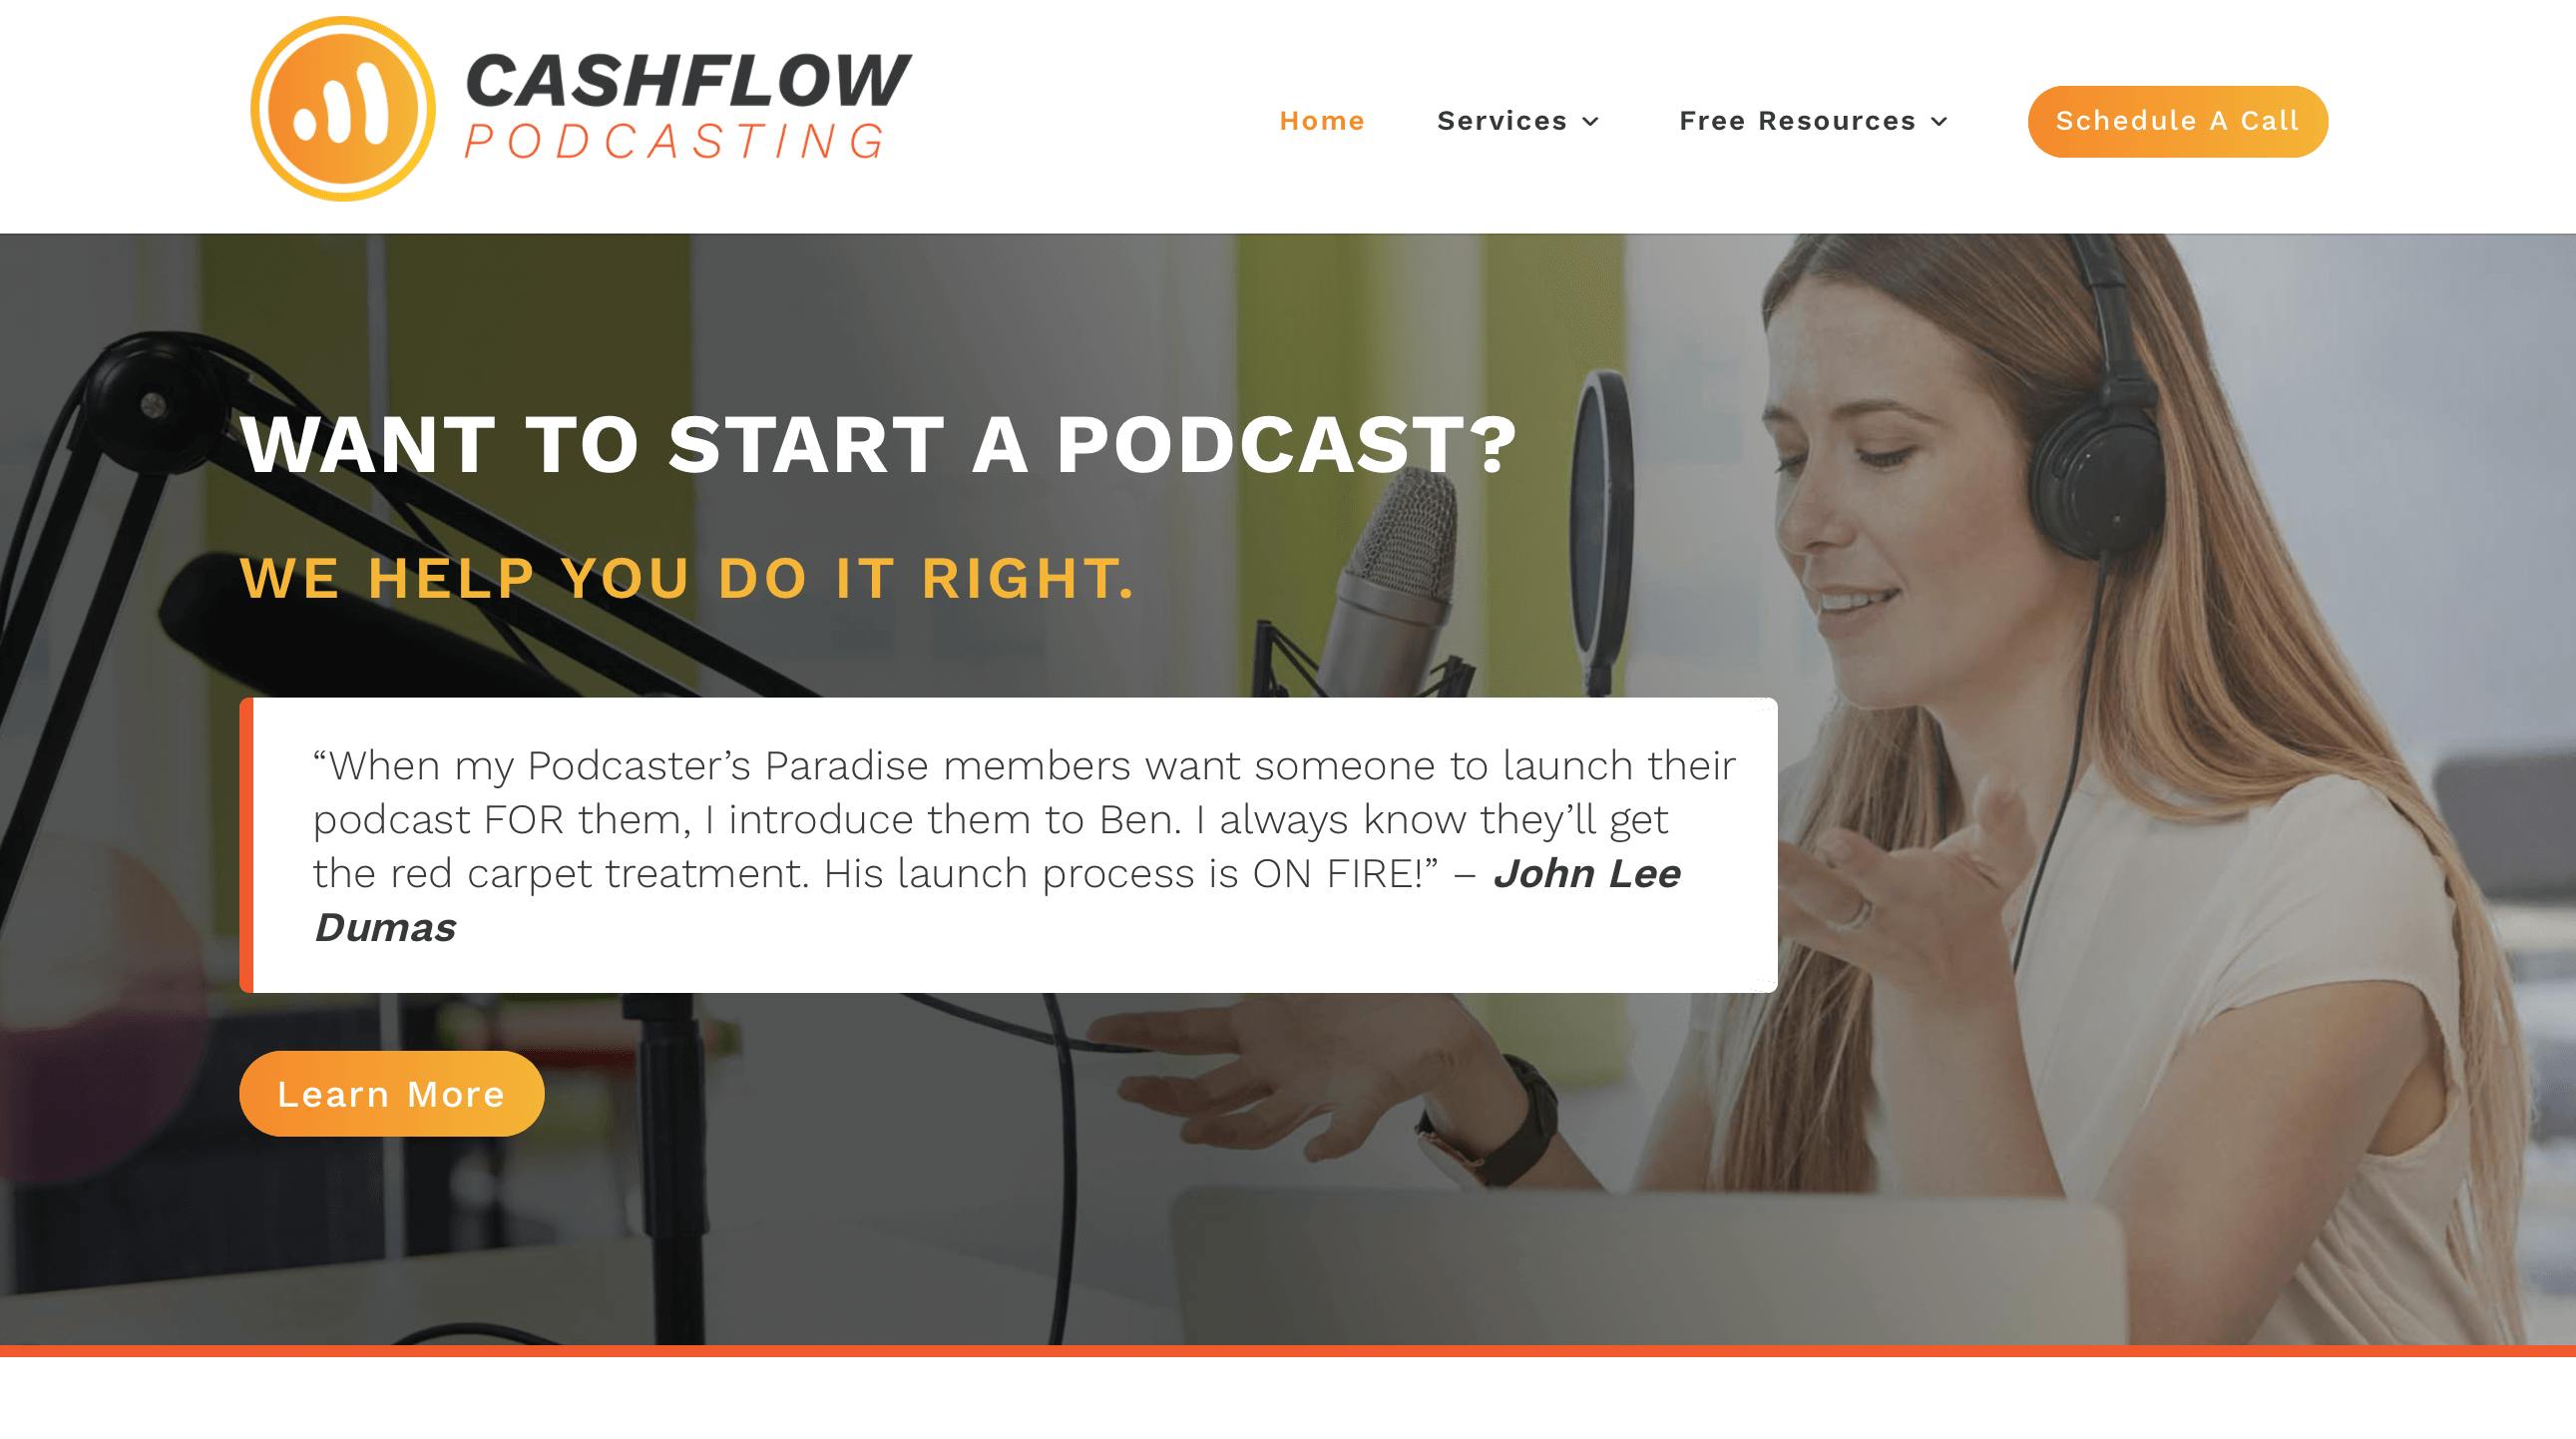 Cashflow Podcasting homepage with woman podcaster in the background and orange buttons